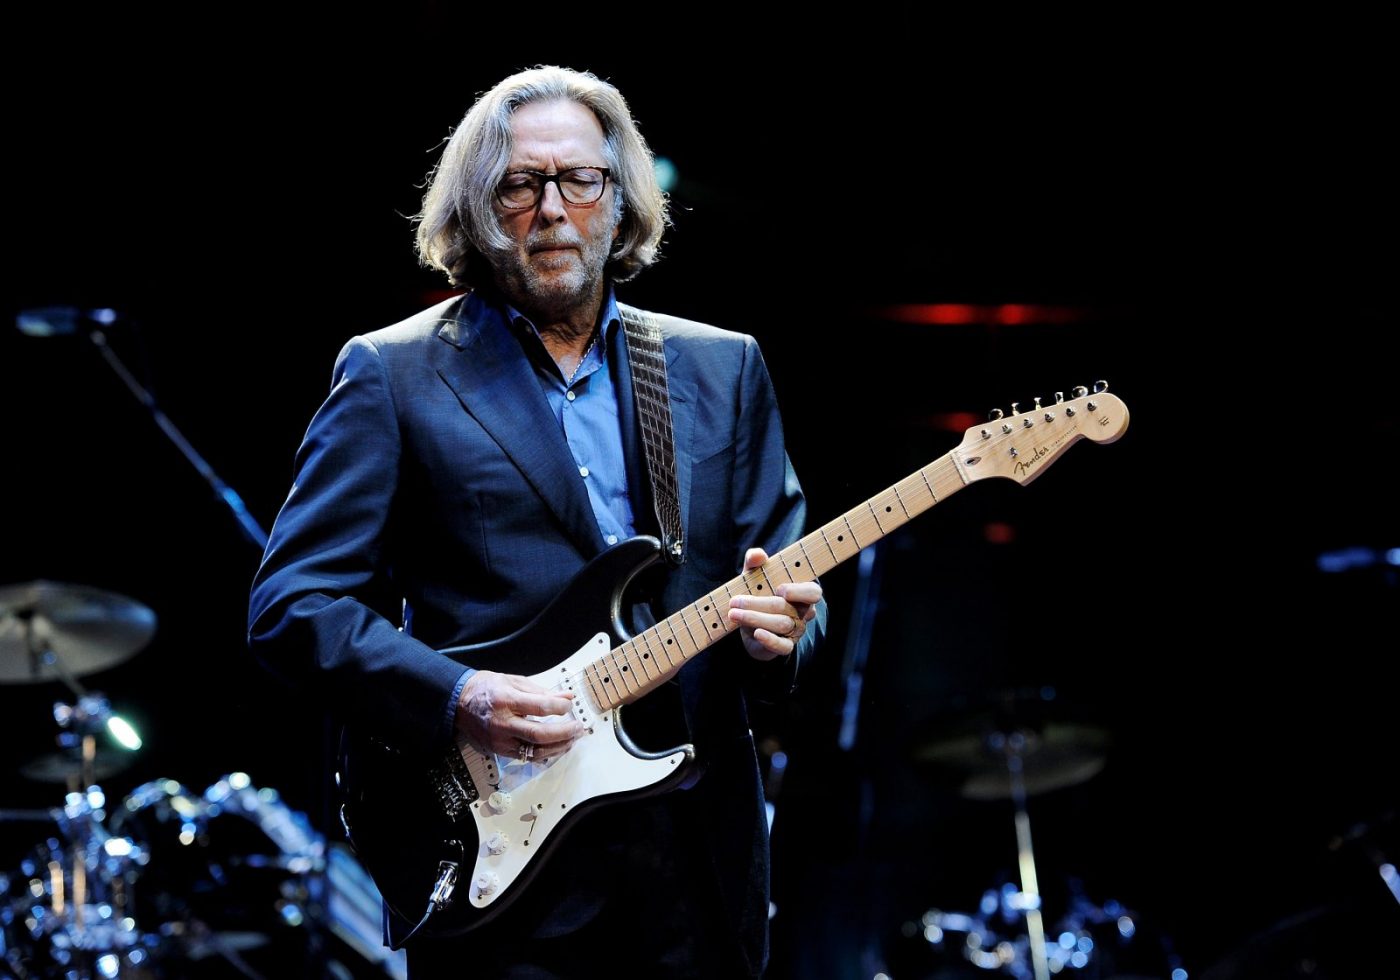 LONDON, ENGLAND - NOVEMBER 17: ***EXCLUSIVE*** Musician Eric Clapton performs at The Prince's Trust Rock Gala 2010 supported by Novae at the Royal Albert Hall on November 17, 2010 in London, England. (Photo by Ian Gavan/Getty Images)